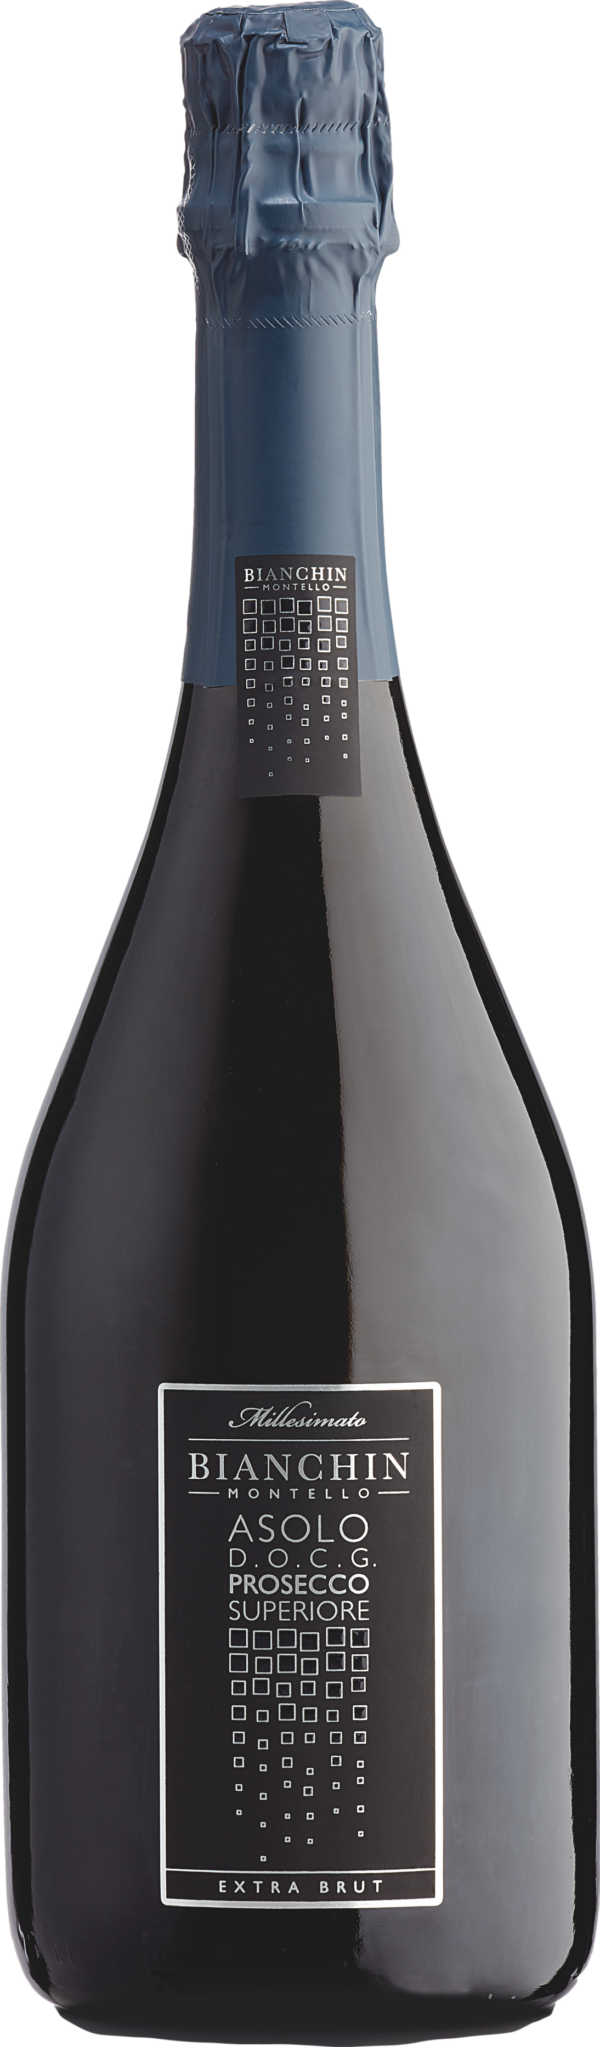 Product image of Bianchin Asolo Prosecco Superiore Extra Brut 2021 from 8wines